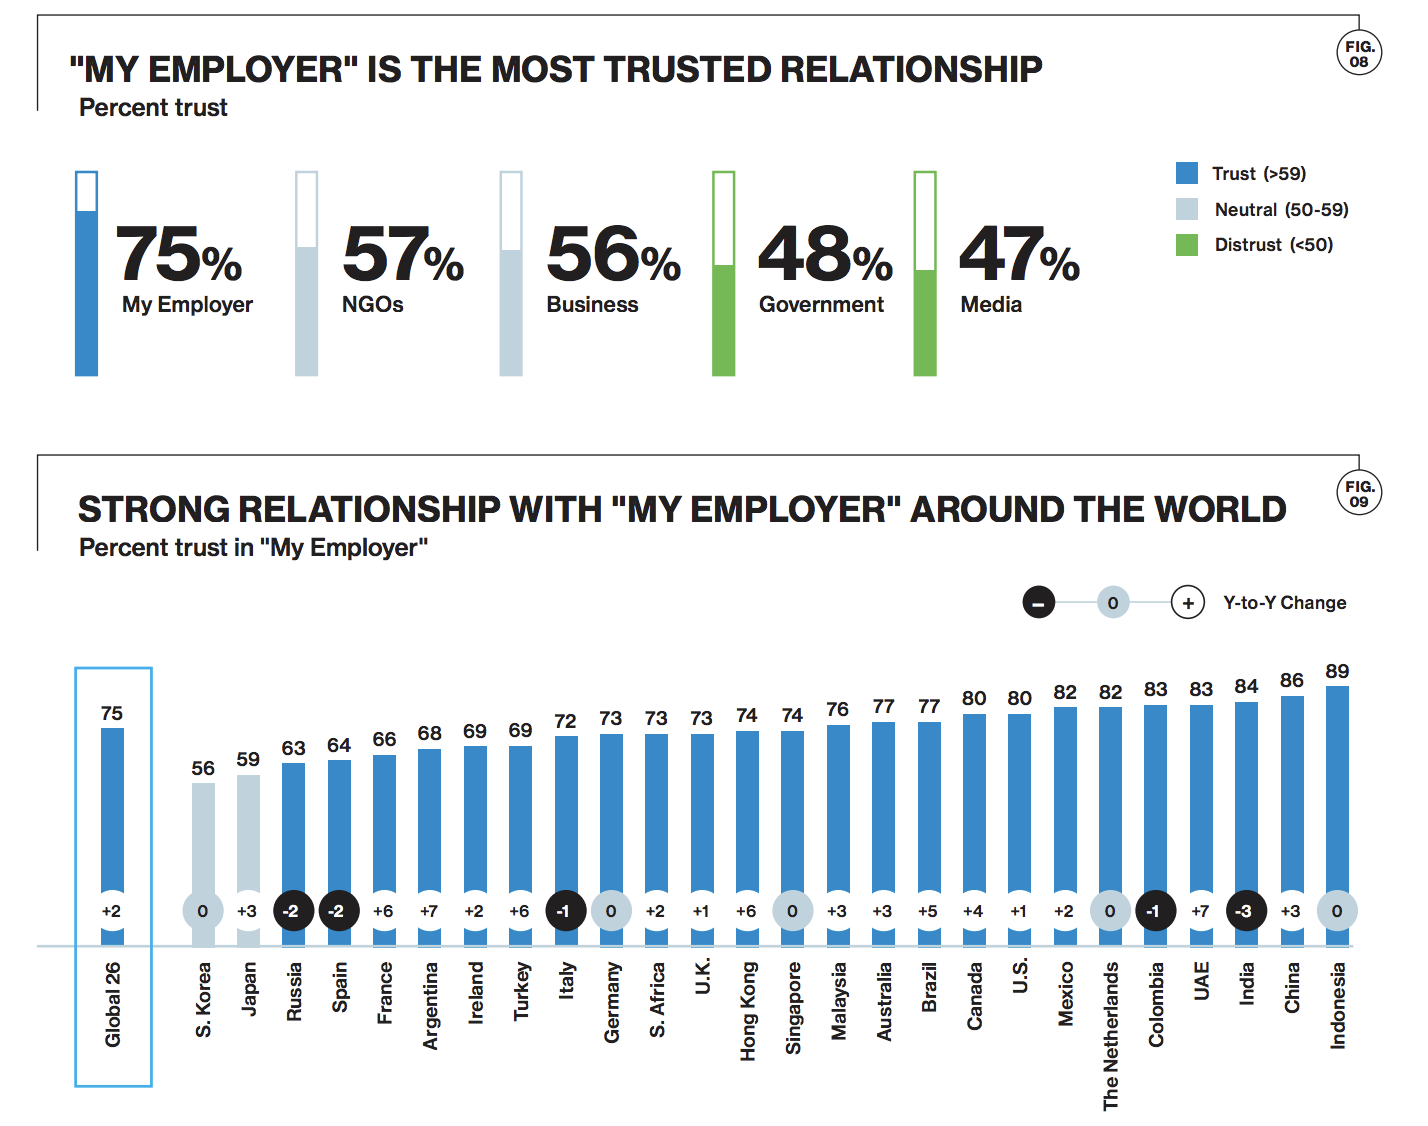 people trust their employer more than any other institution around the world